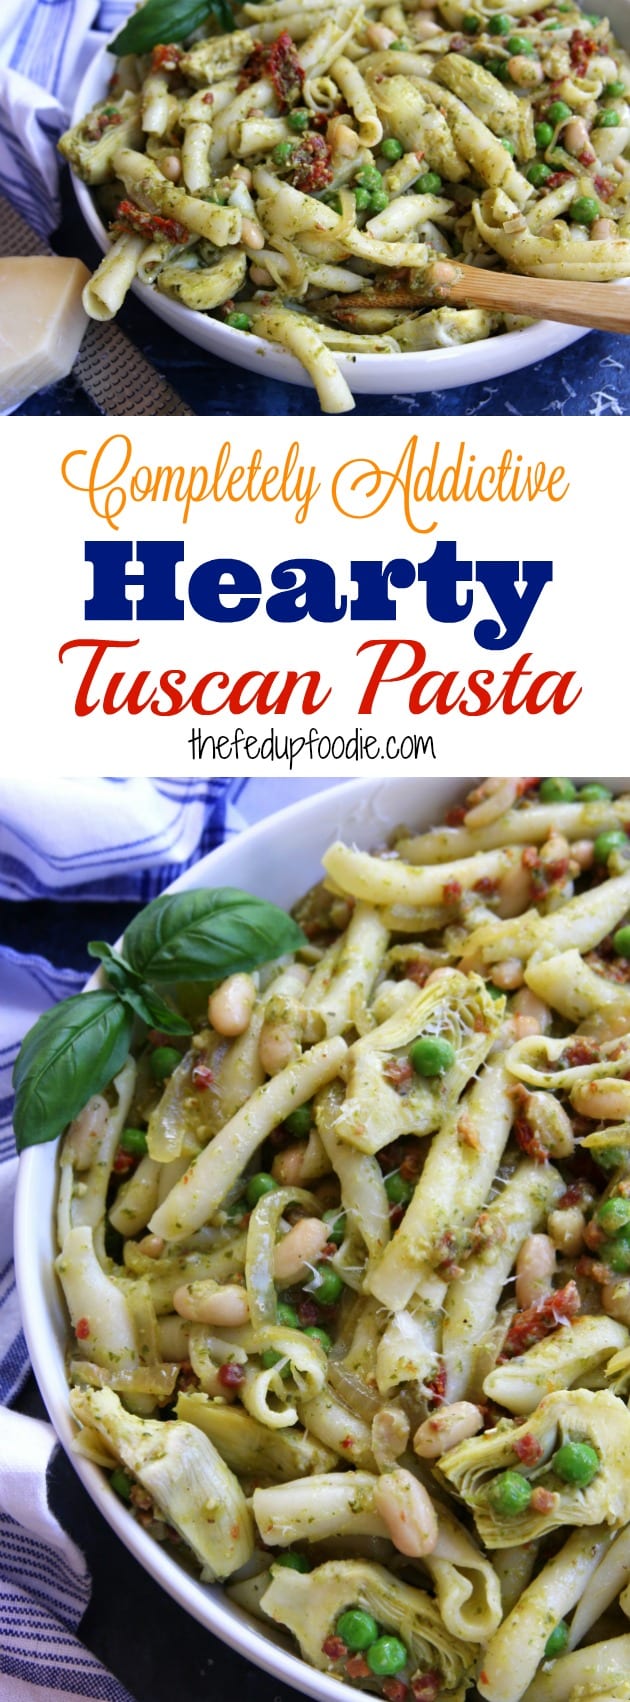 Hearty Tuscan Pasta recipe is completely addictive with bacon, artichokes, capellini beans and pesto. One of the best meals to impress with simple steps that comes together in less than 30 minutes. So much of a family favorite that we makes it several times a month! https://www.thefedupfoodie.com/